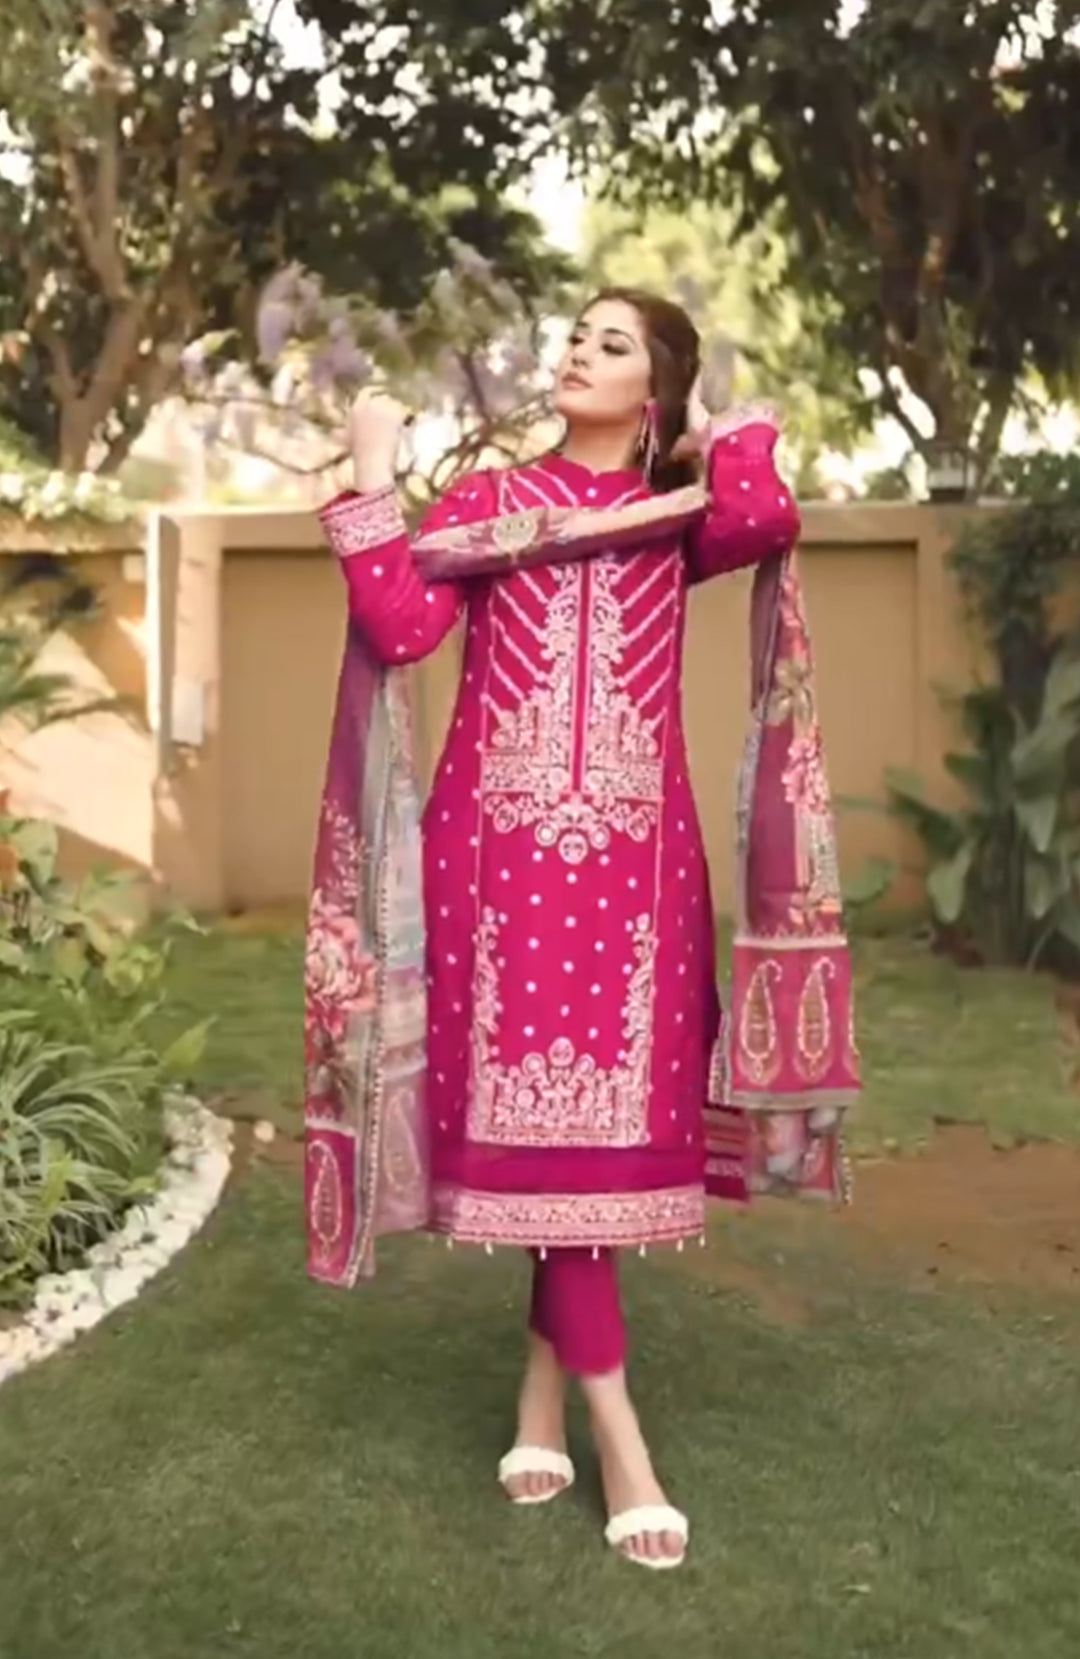 Verdurous | 3-PC Stitched Embroidered Cotton Suit with Printed Silk Dupatta